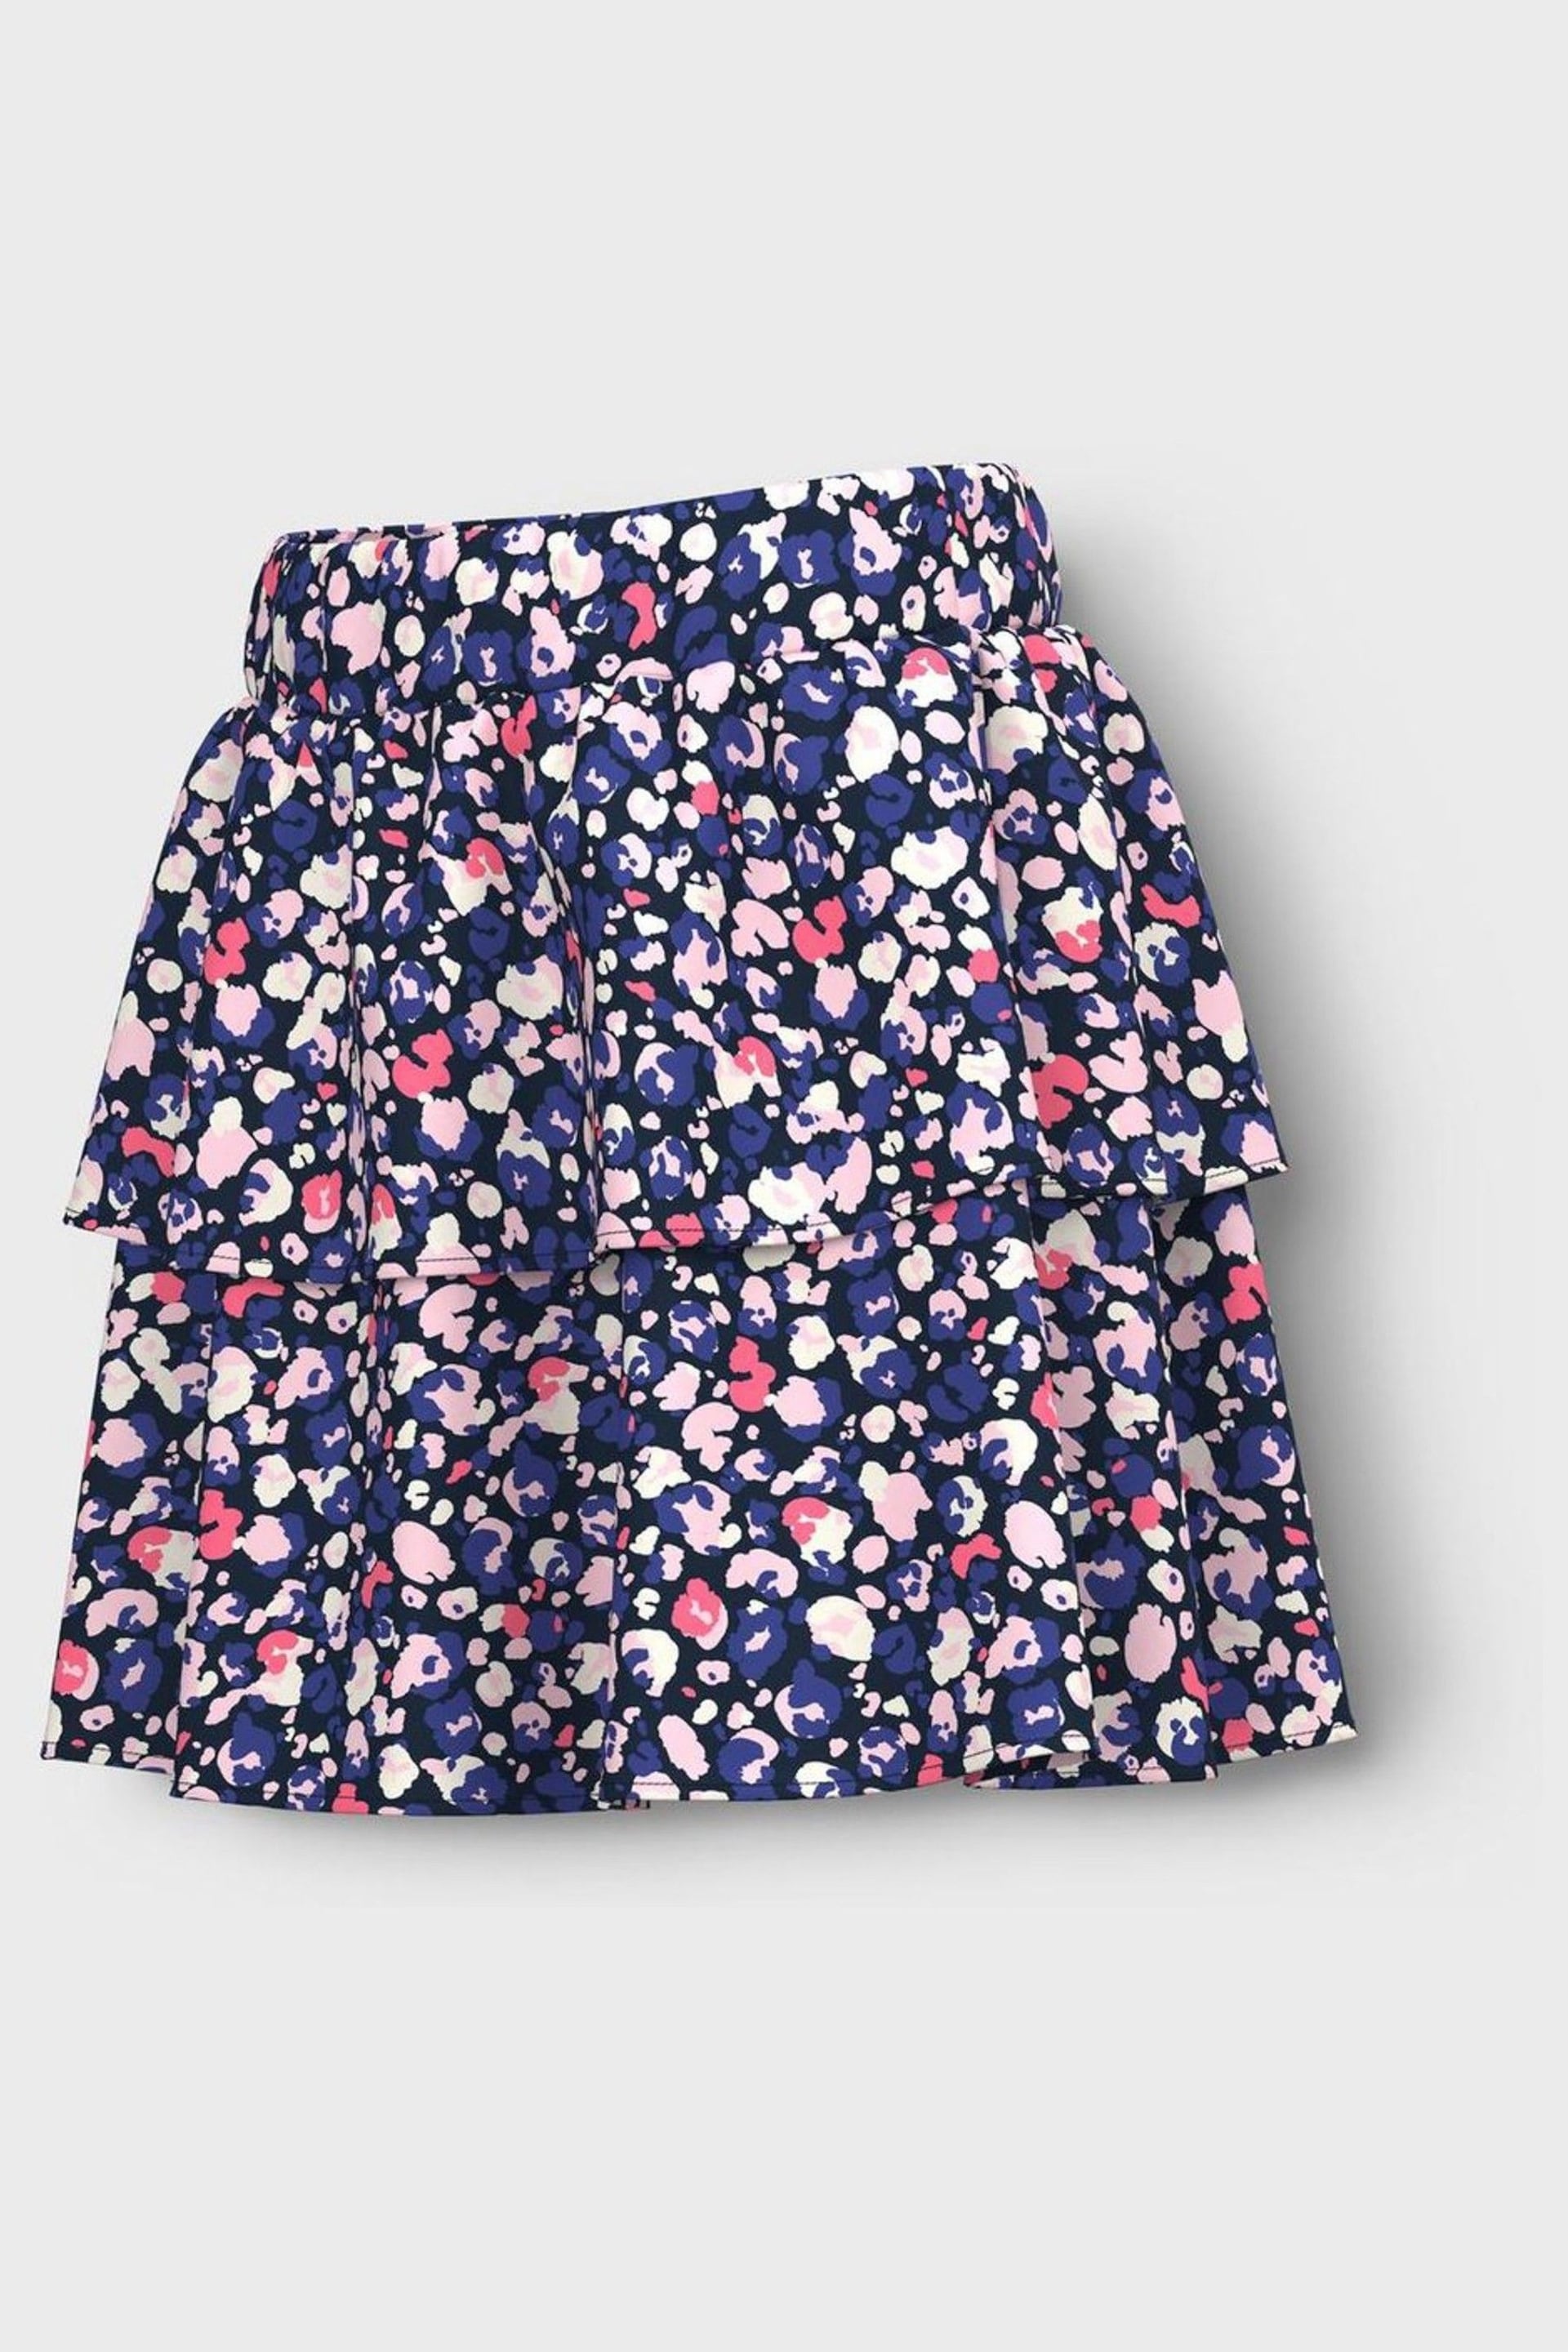 Name It Blue Printed Skirt - Image 3 of 3